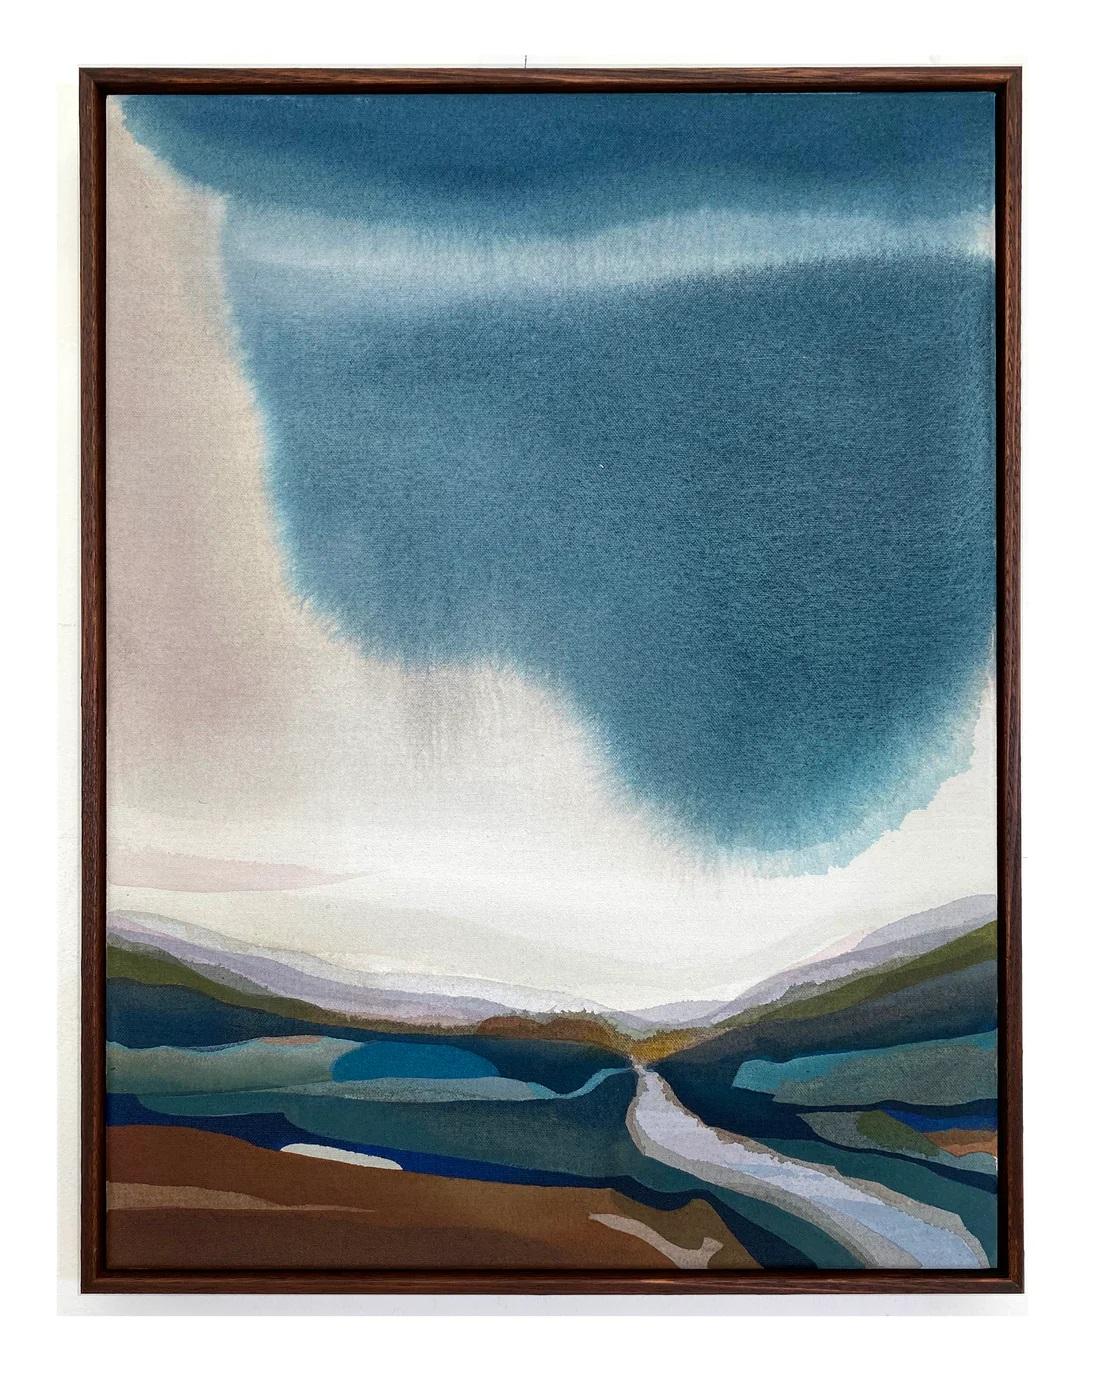 Quiet Composition #4, contemporary framed landscape painting by Stefan Gevers